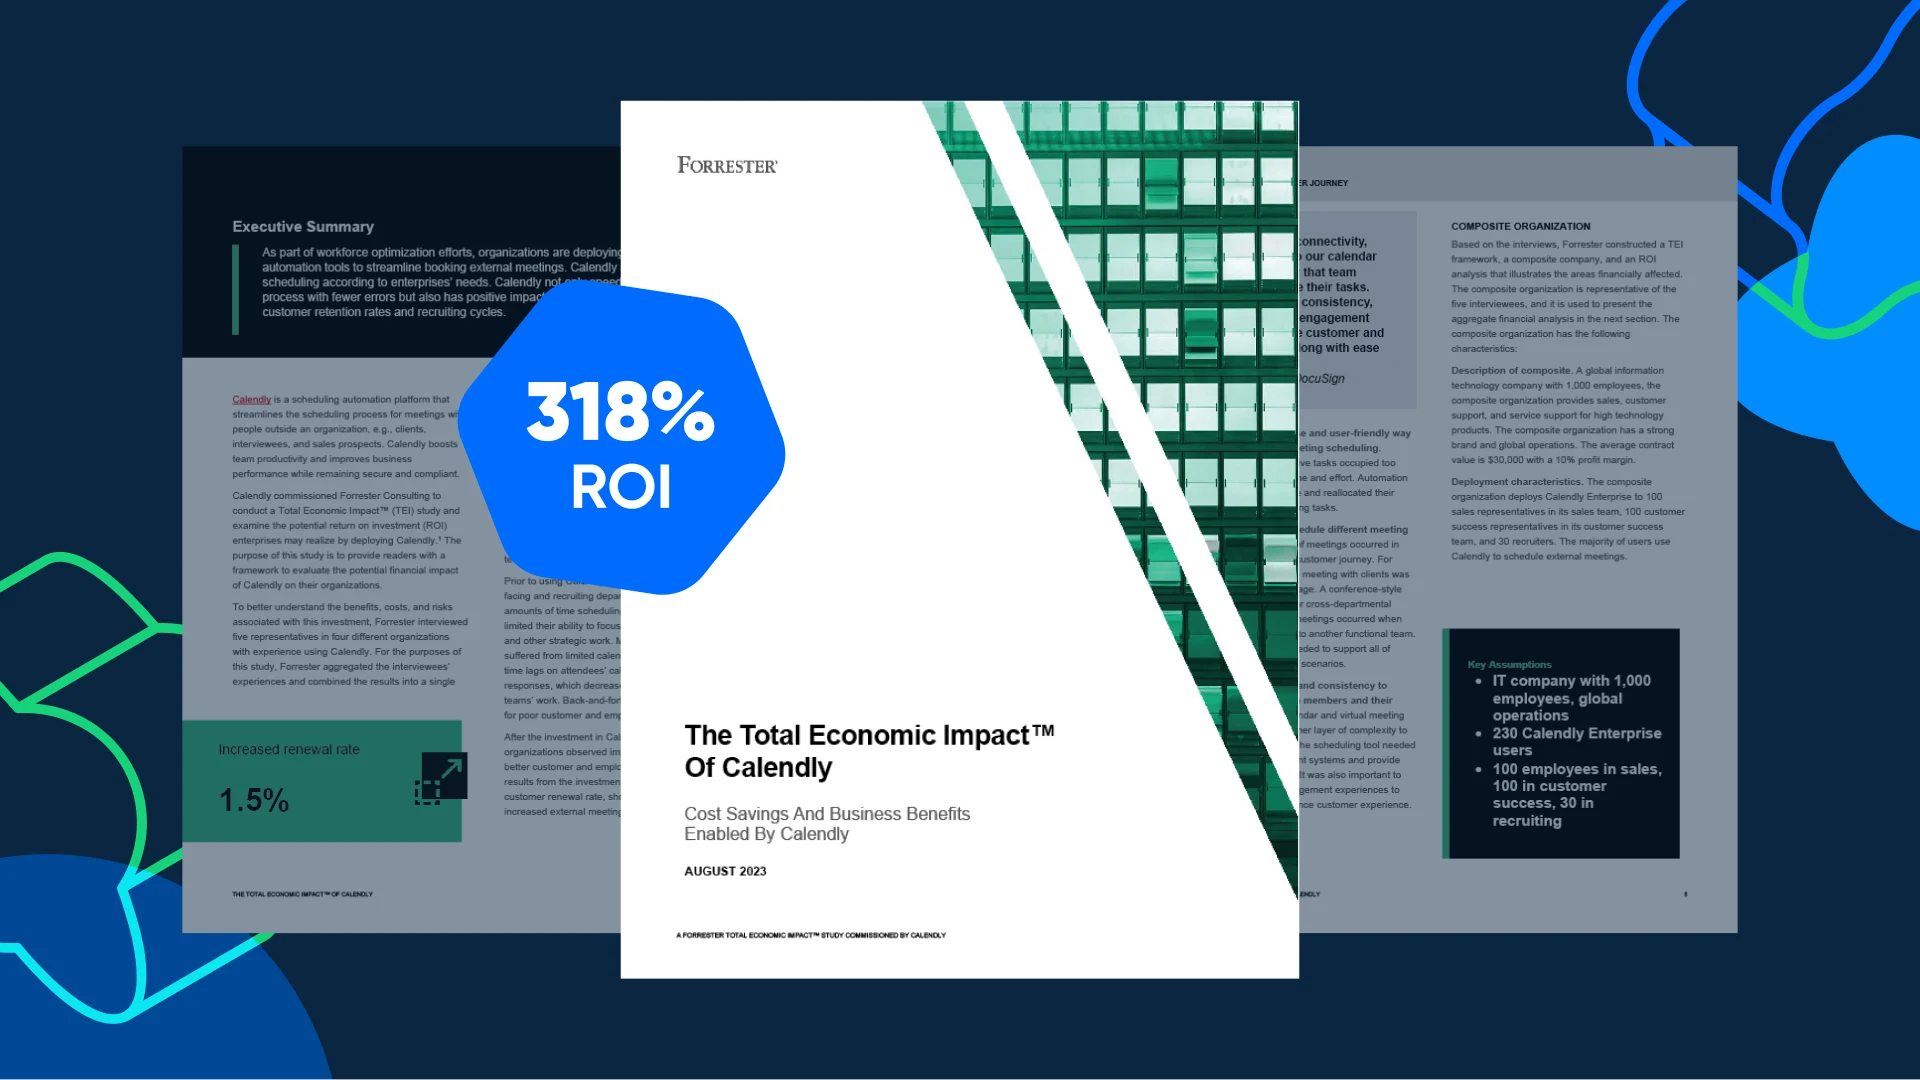 Forrester study: Calendly provided a 318 ROI